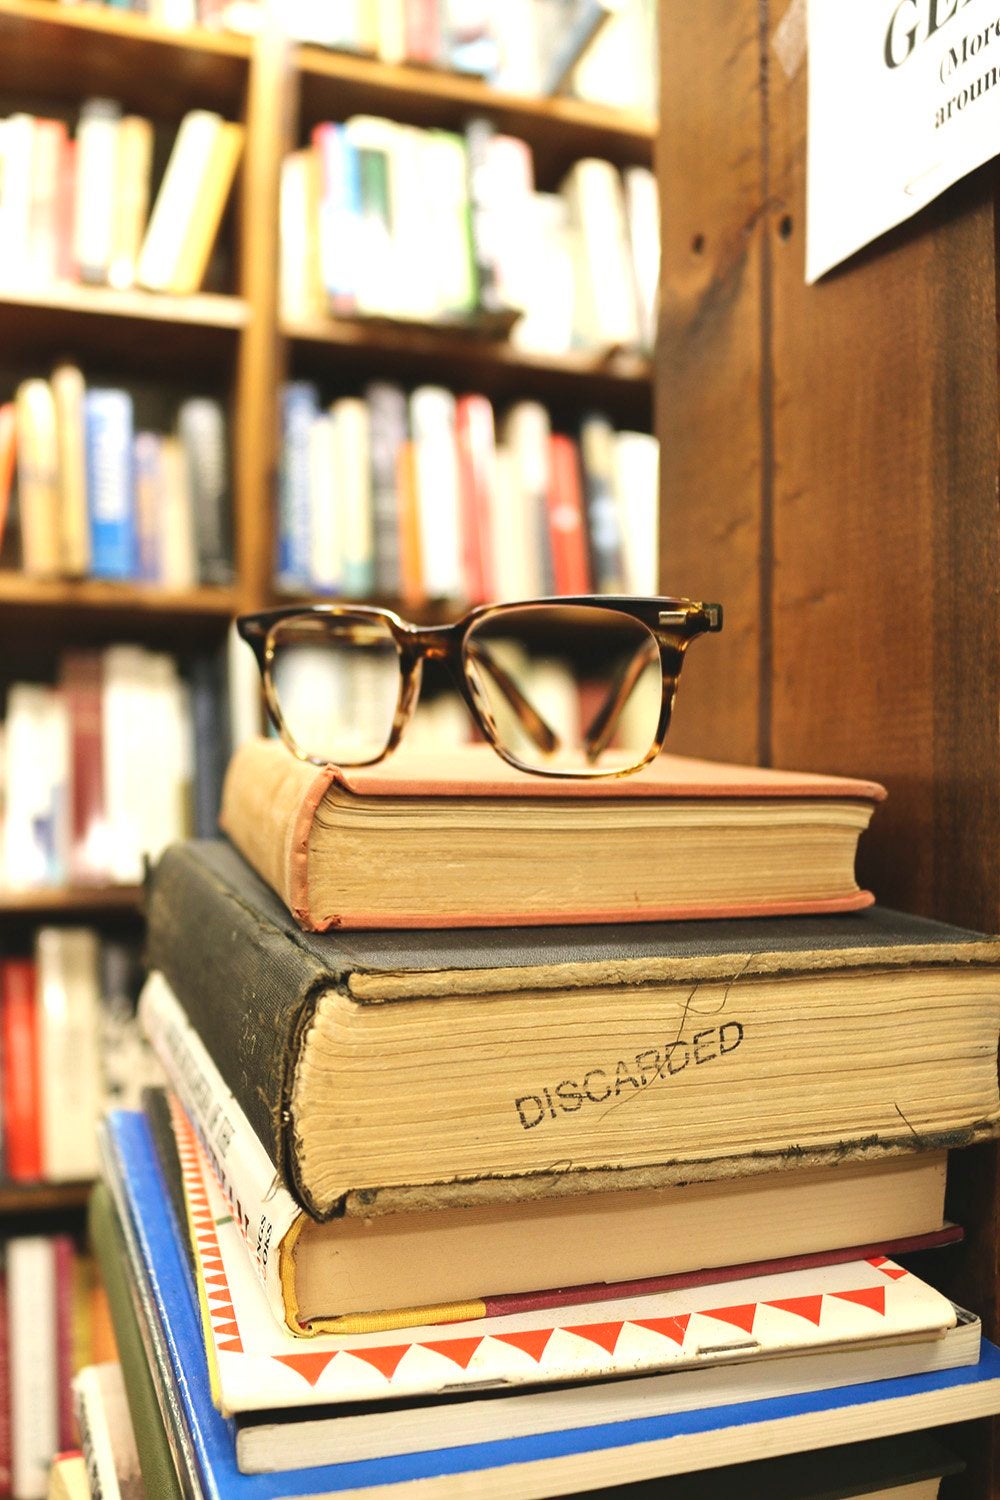 The Lalastalk Of Books And Glasses